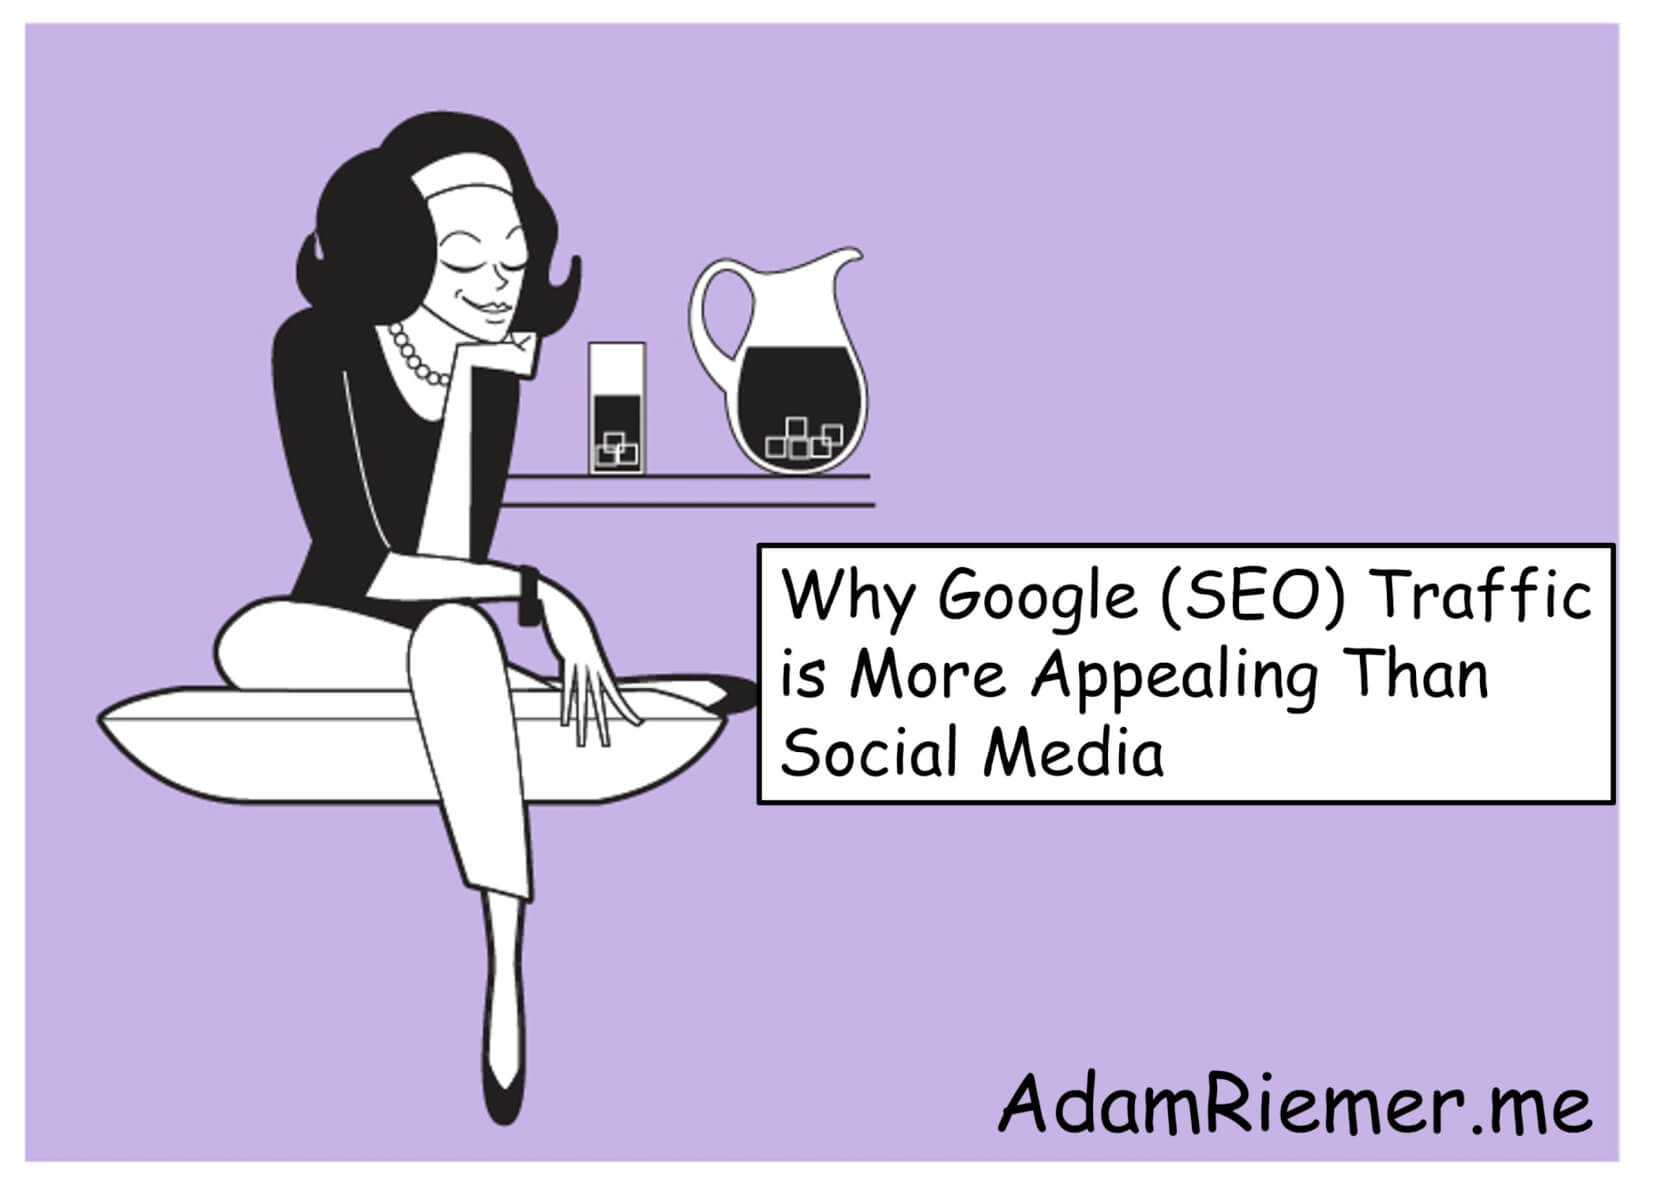 Why Google SEO Traffic is More Appealing Than Social Media